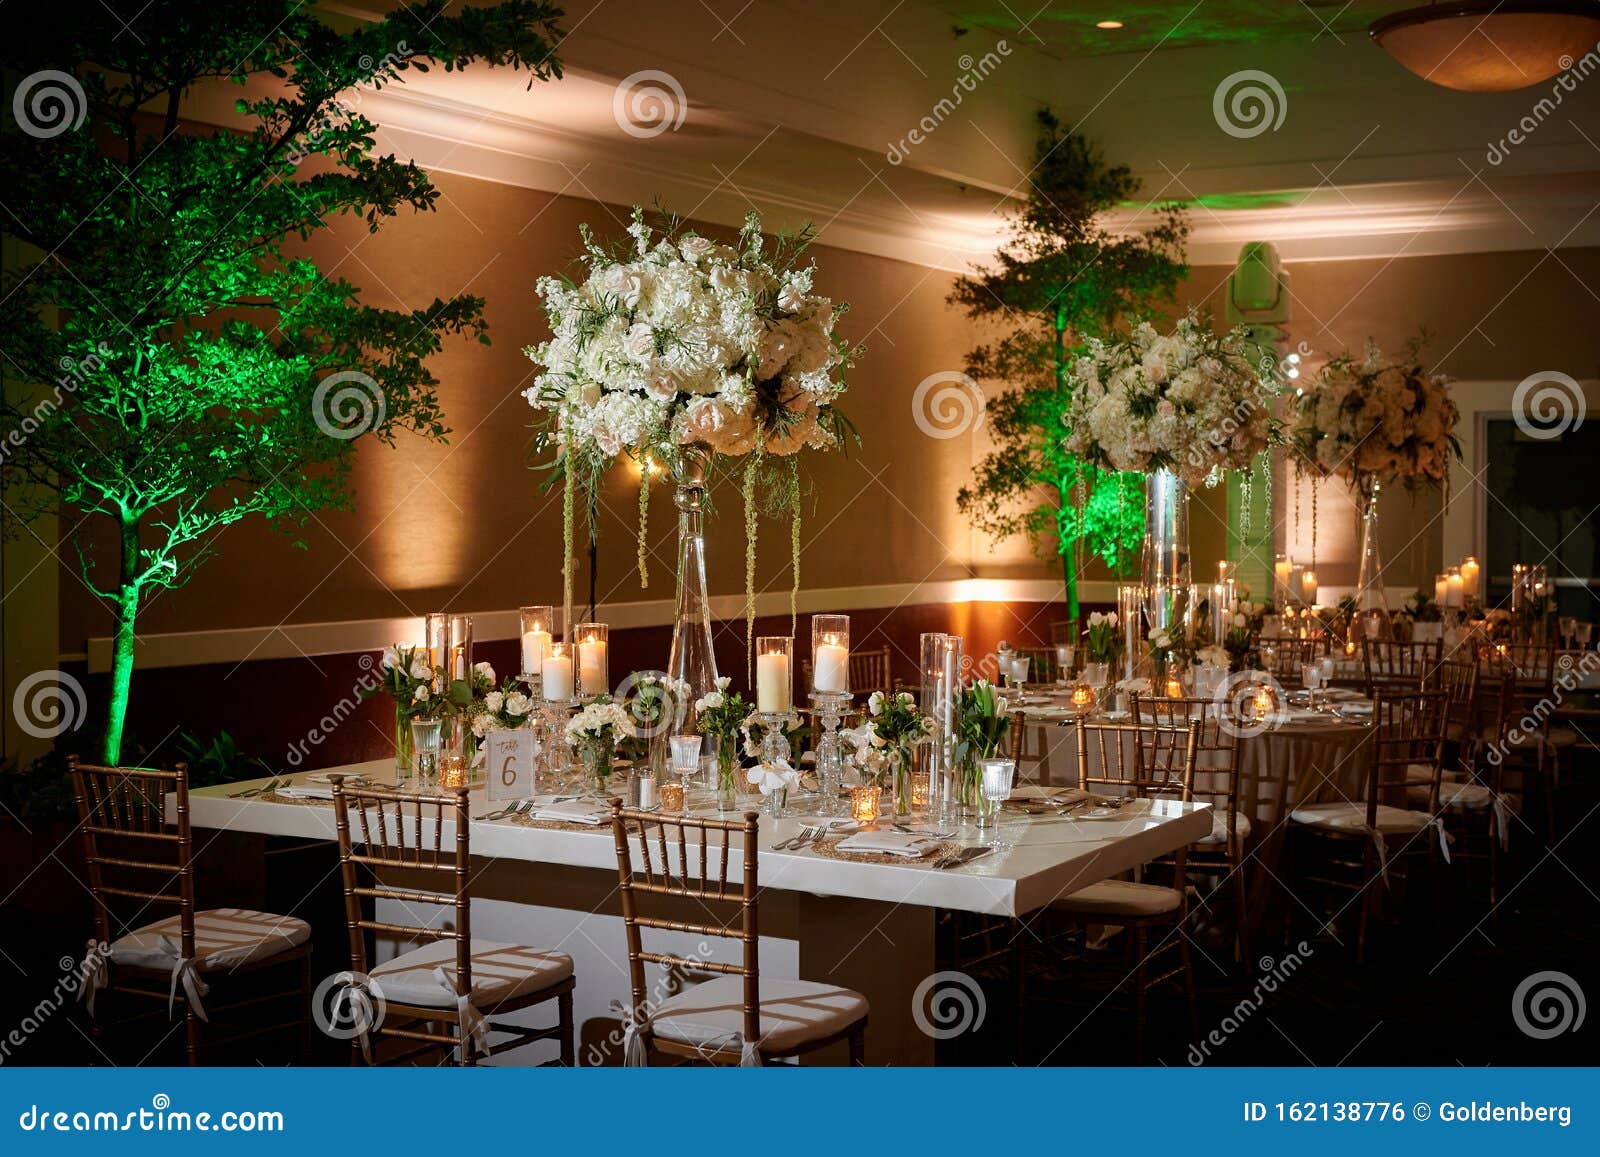 luxury table setting at a wedding venue